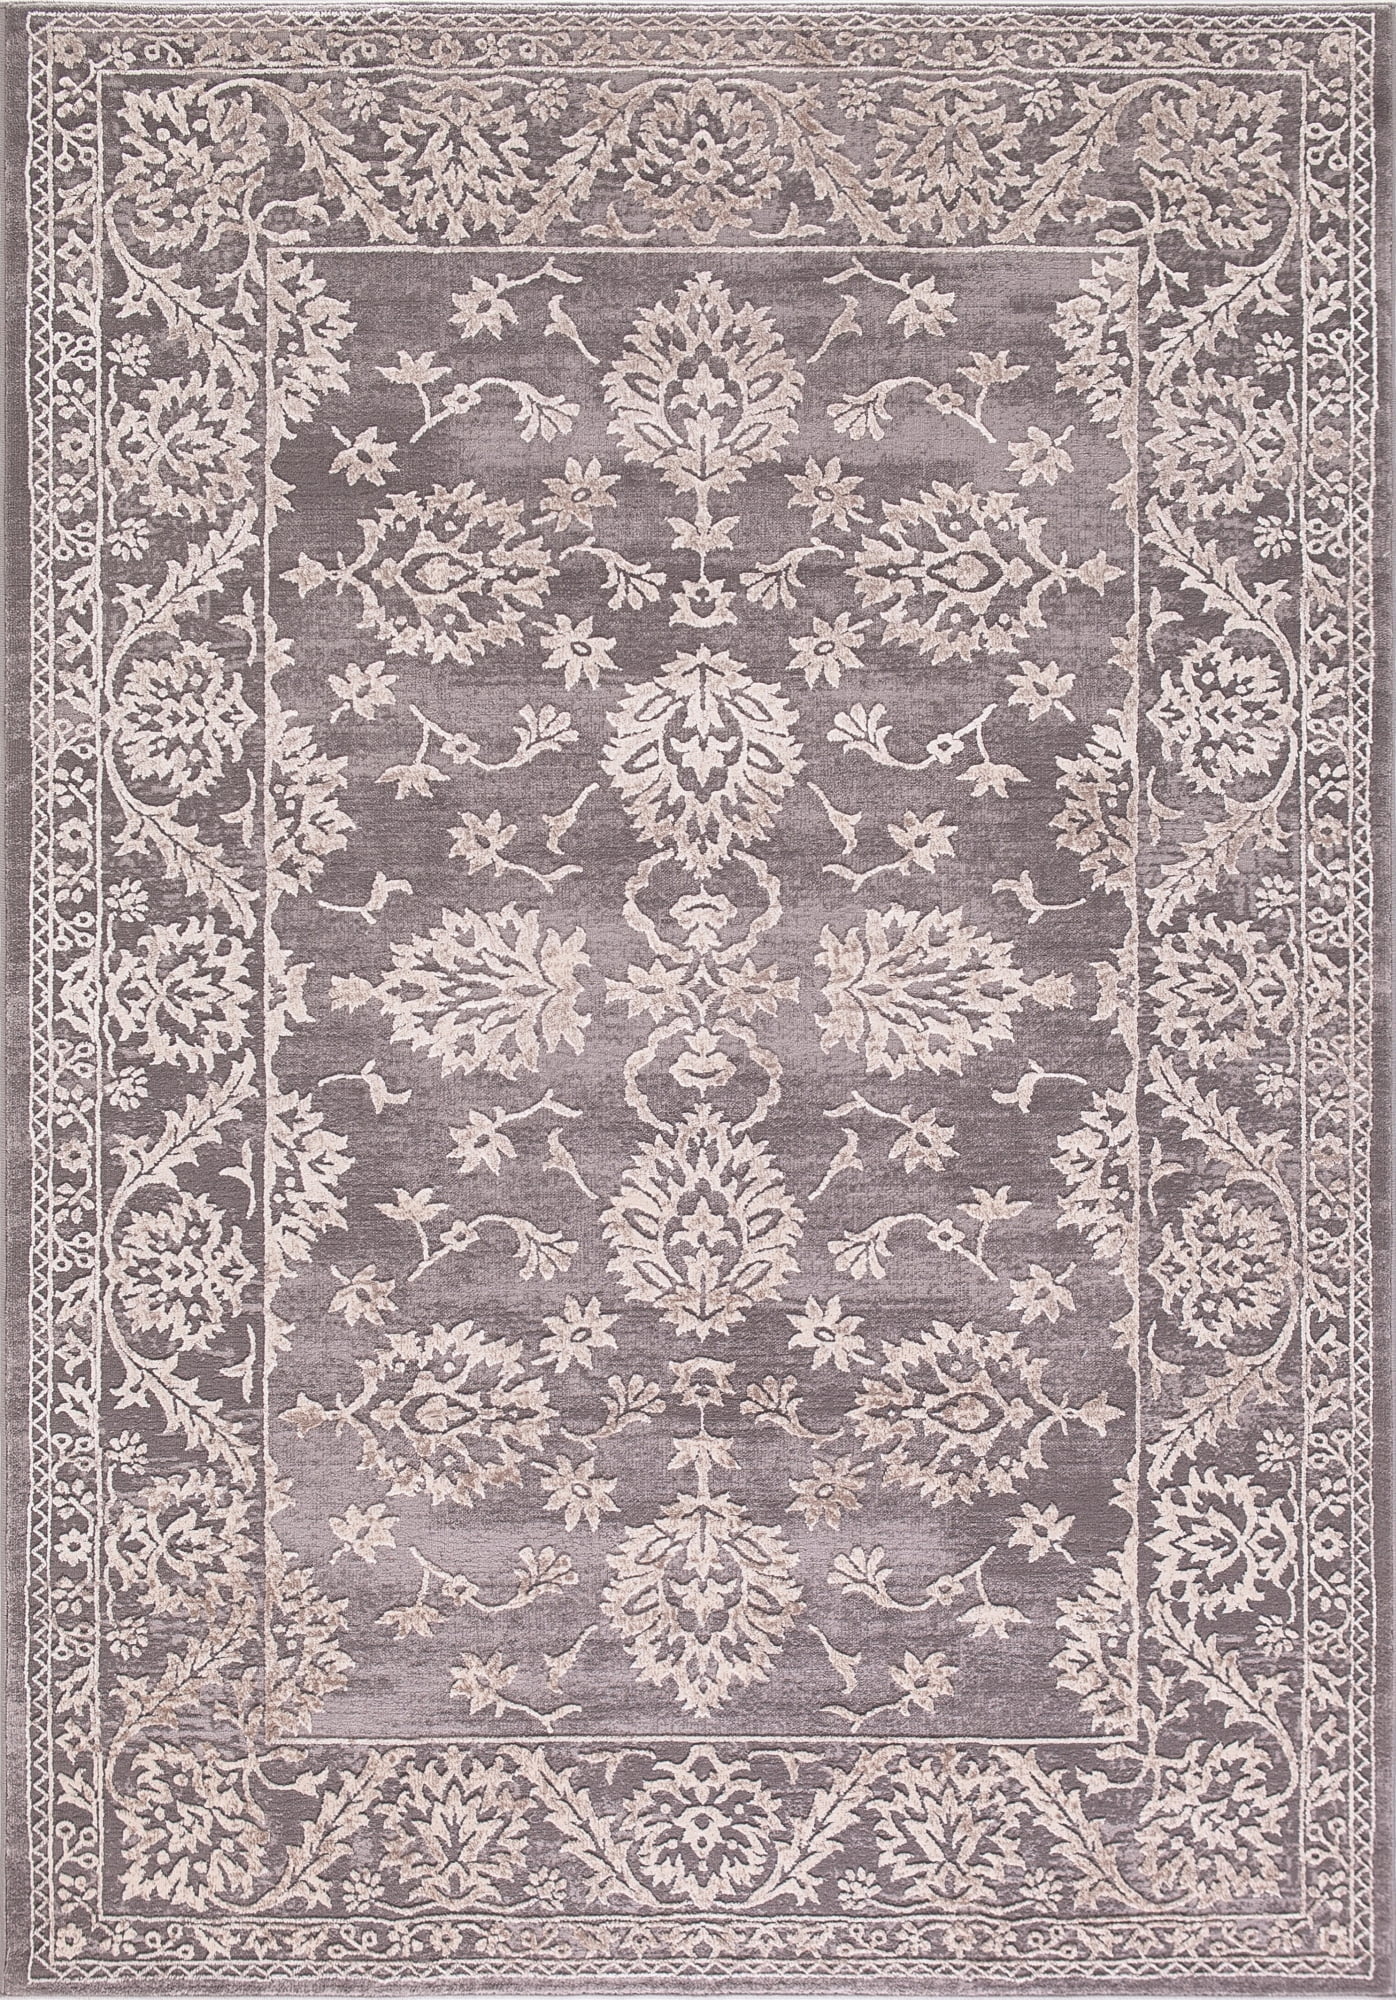 Picture of Concord Global 29816 6 ft. 7 in. x 9 ft. 3 in. Thema Anatolia - Beige, Gray